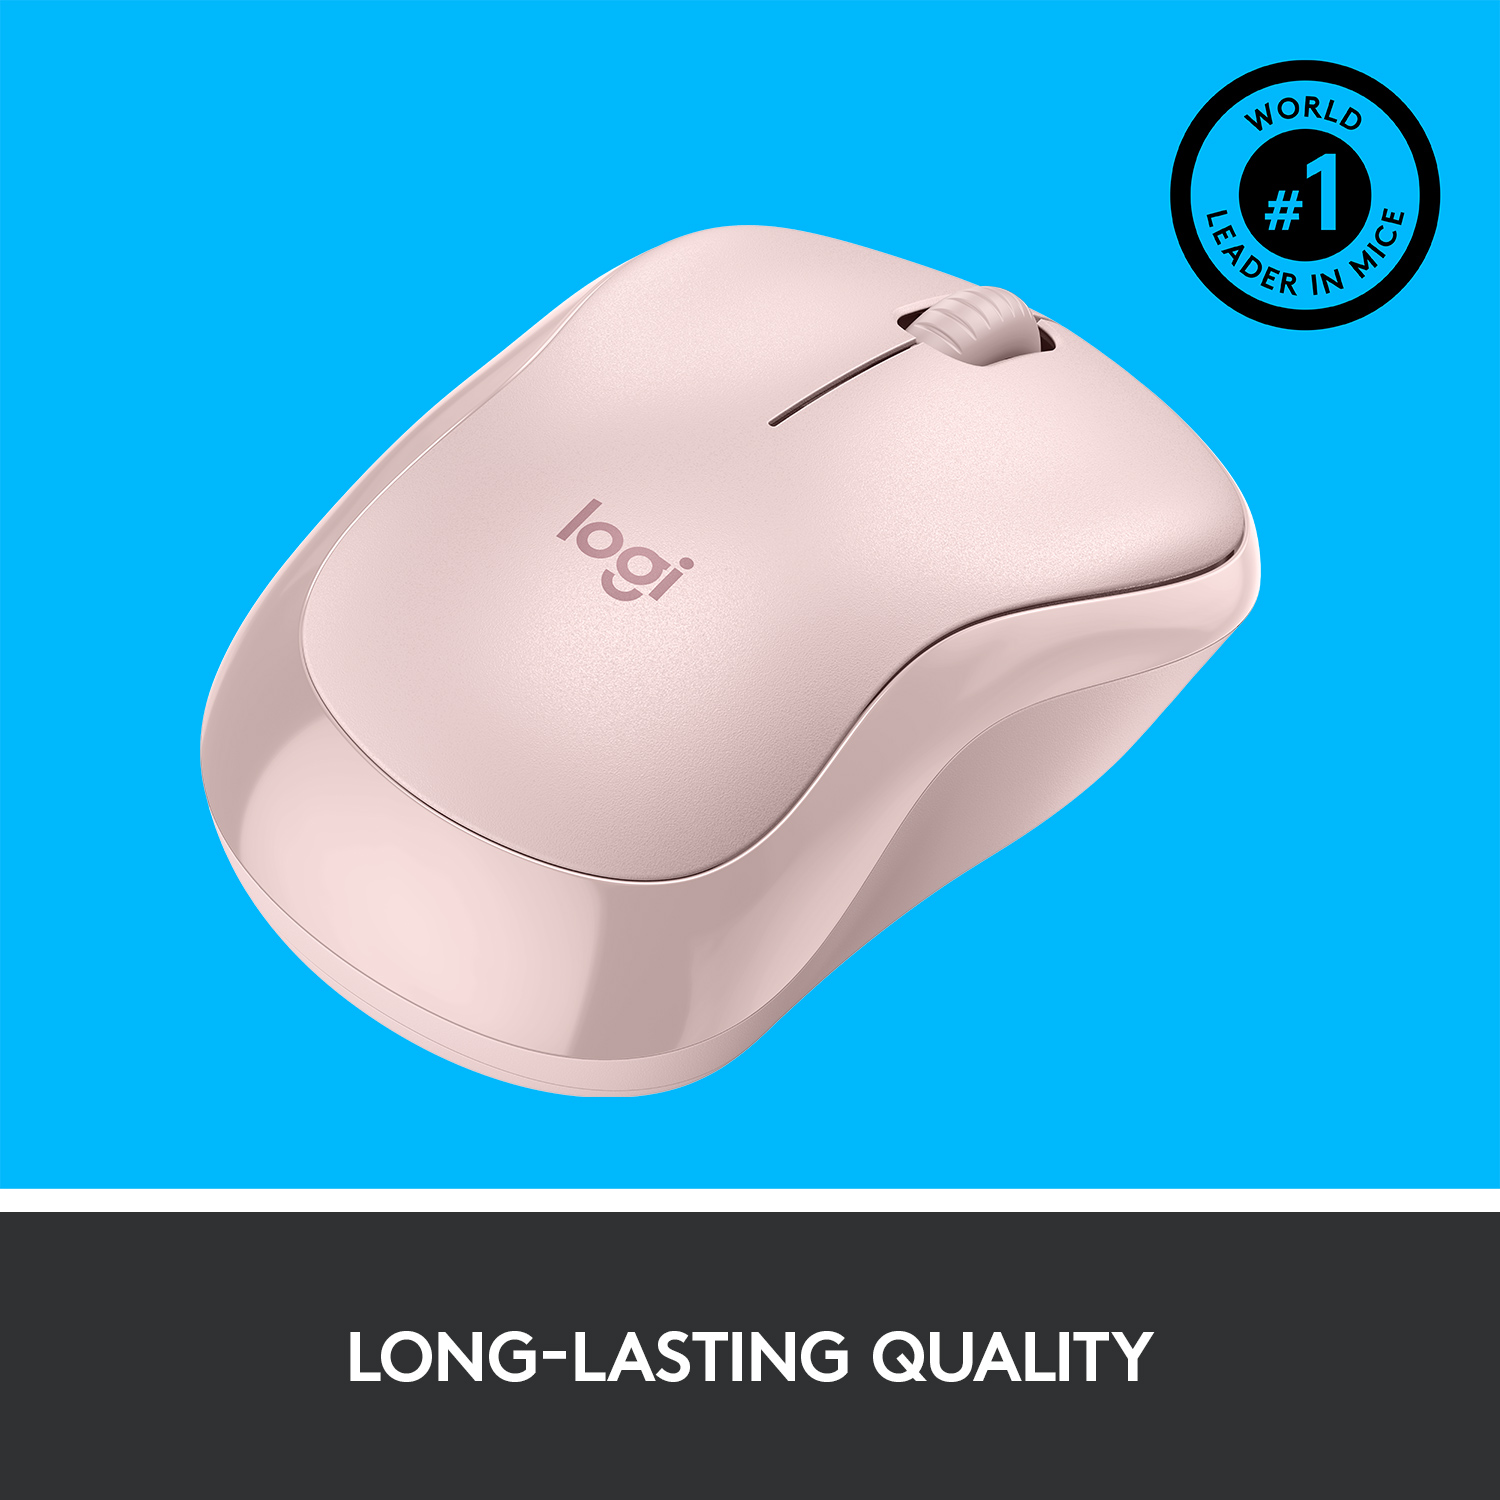 Logitech Silent WRLS Mouse, 2.4 GHz with USB Receiver, Optical Tracking, Ambidextrous, Rose - image 5 of 8